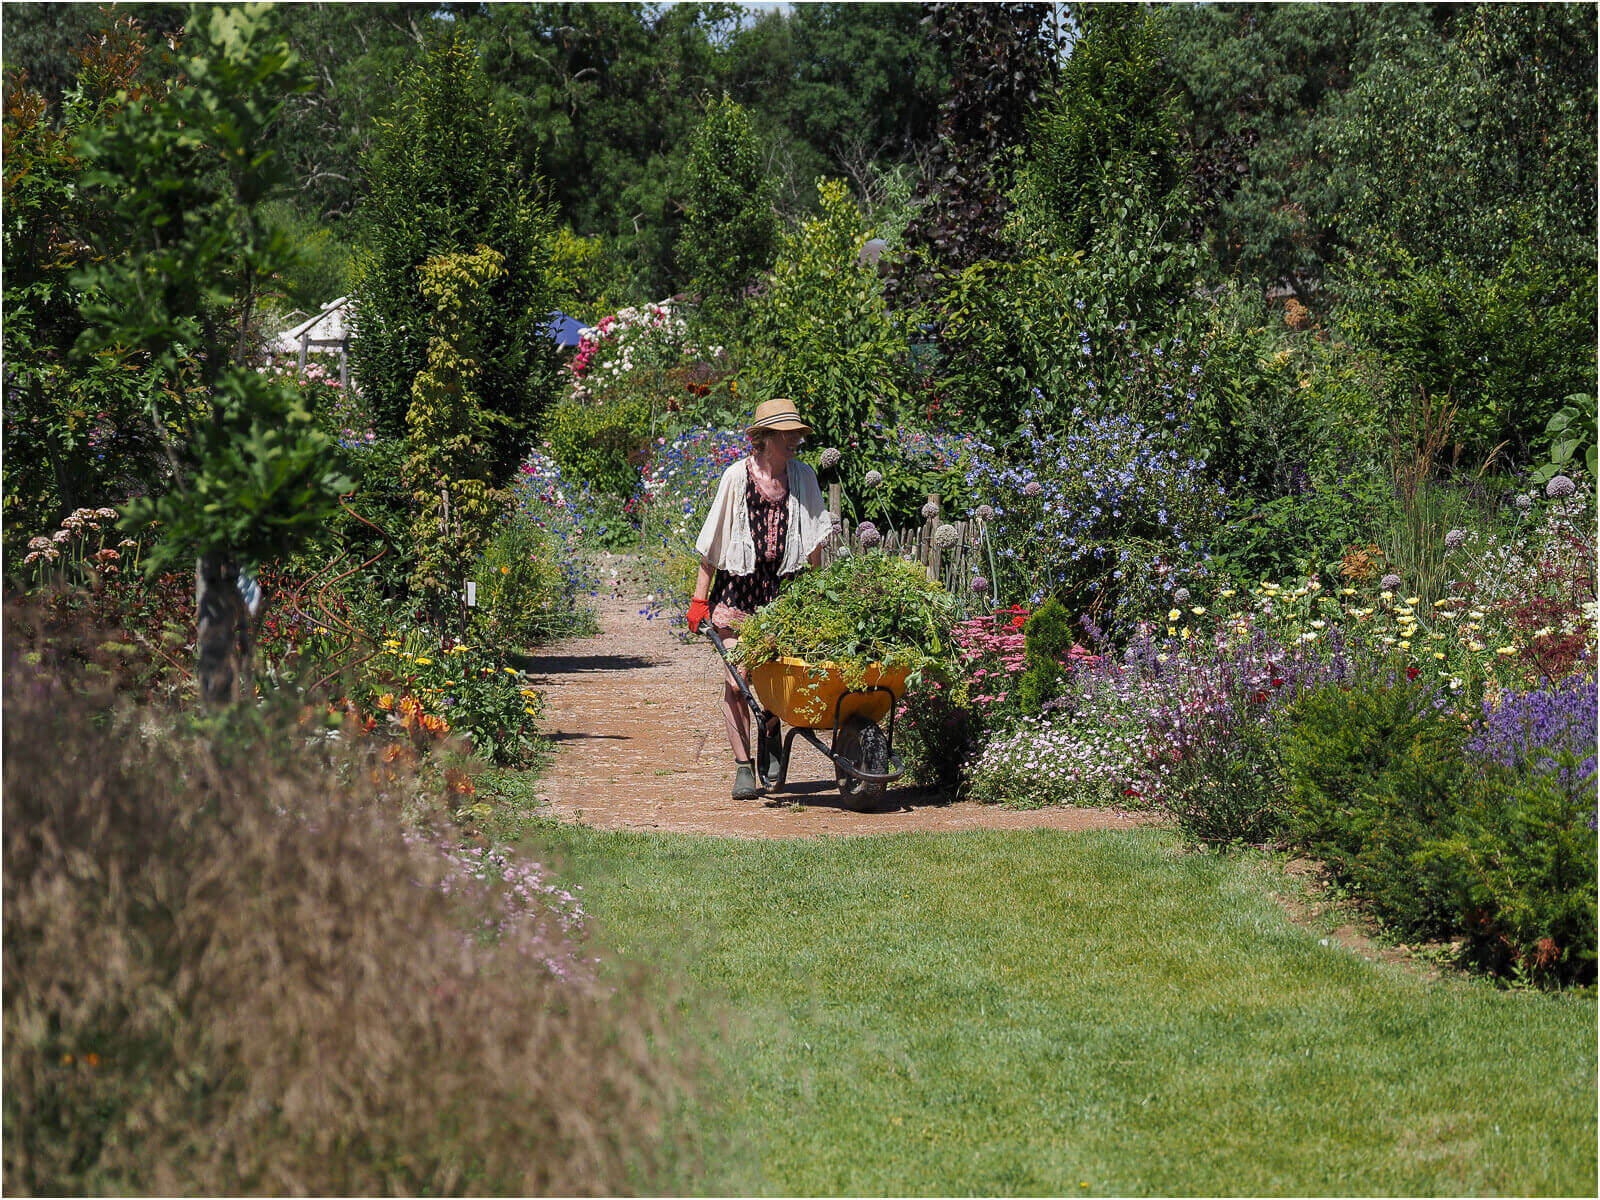 A gardener pushing a wheelbarrow through a mixture of flowers and plants at The Cottage Gardens.